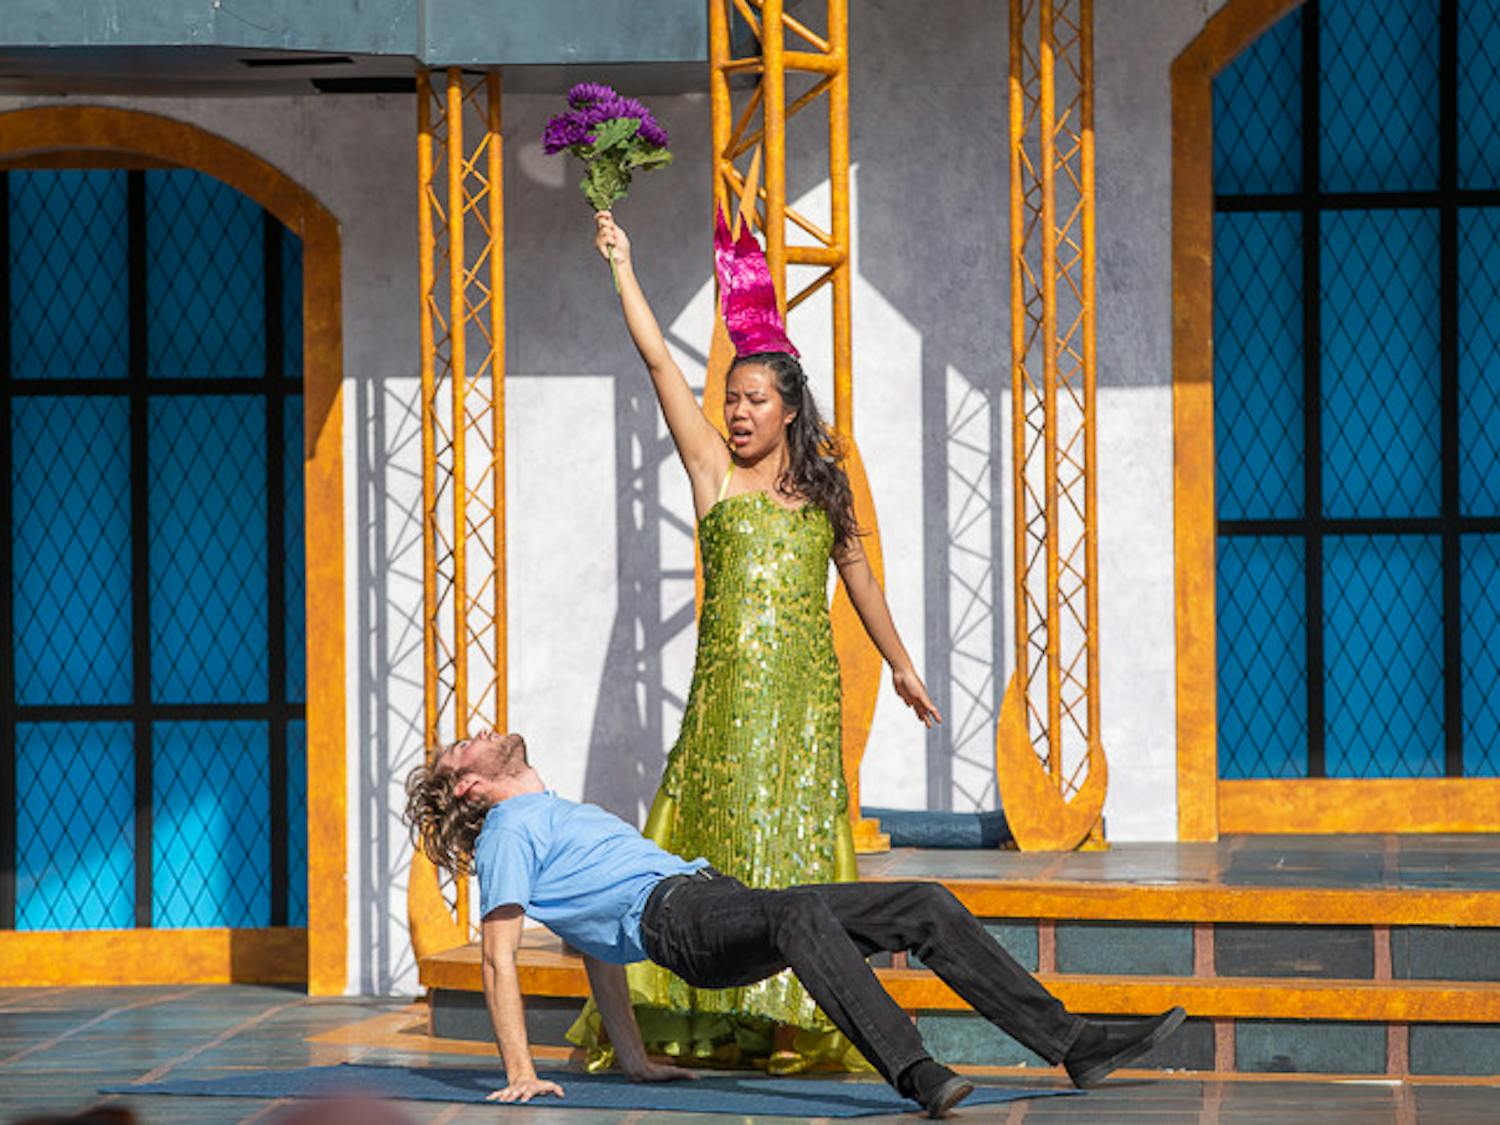 Titania, portrayed by fourth-year hospitality and tourism student Zoe Chan enchants Demetrius, portrayed by fourth-year film and media studies student Rayne Norris during the showing of "A Midsummer Night's Dream" on Oct. 9, 2022. &nbsp;USC Department of Theatre and Dance held the play from October 2 to 9, 2022.&nbsp;